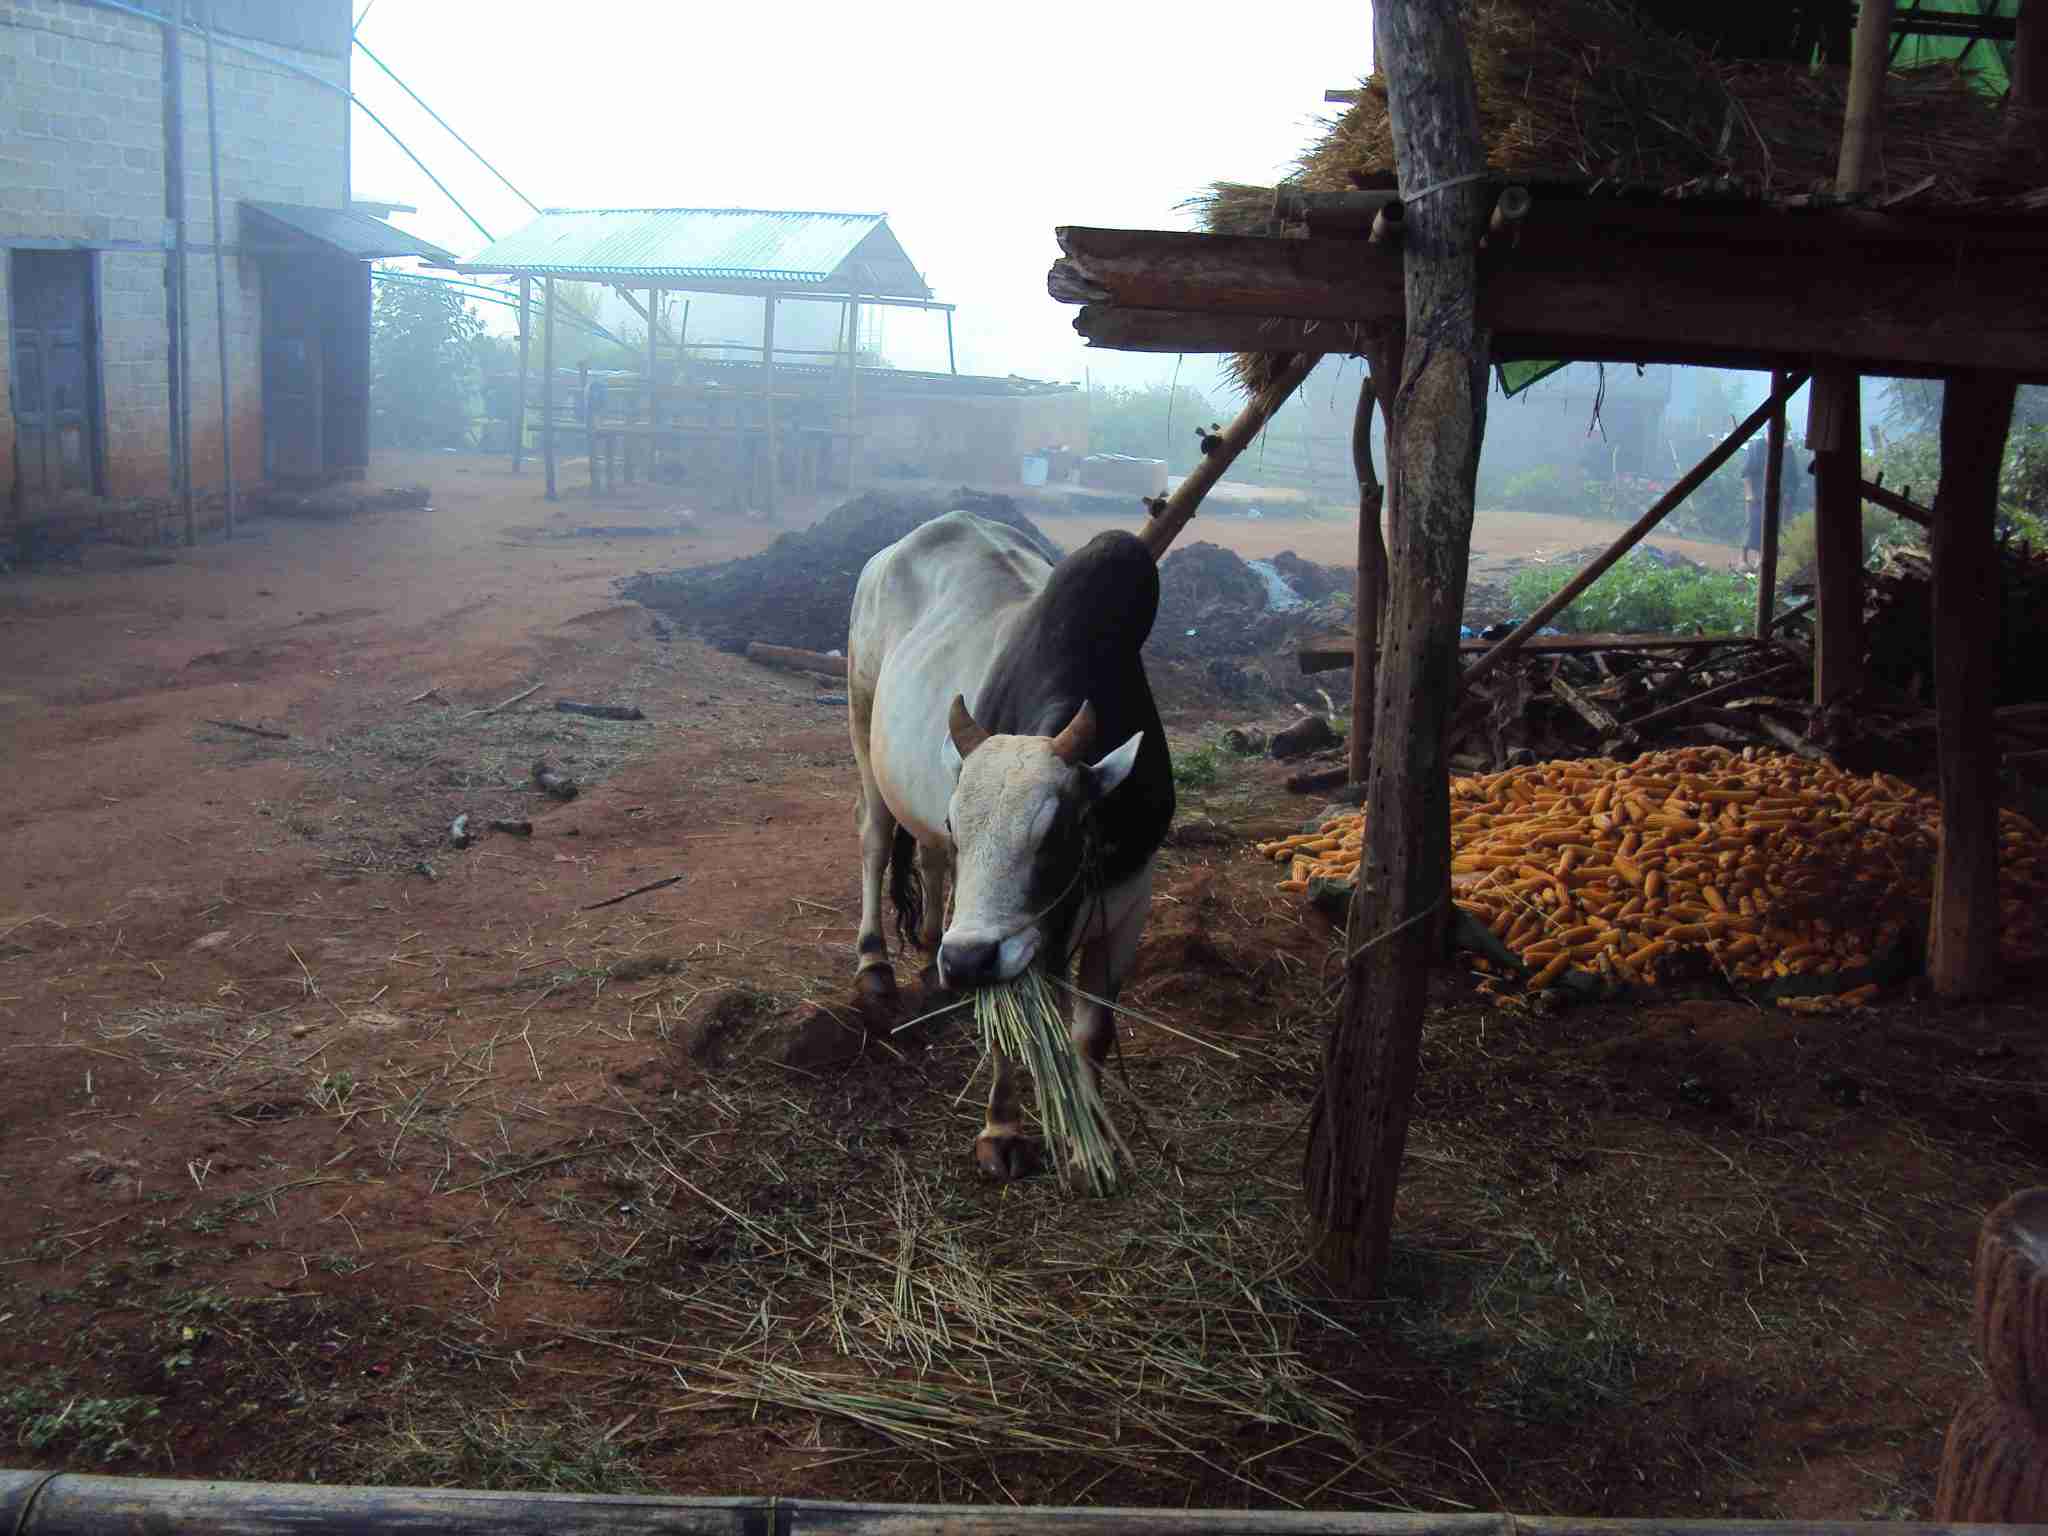 Cows at breakfast